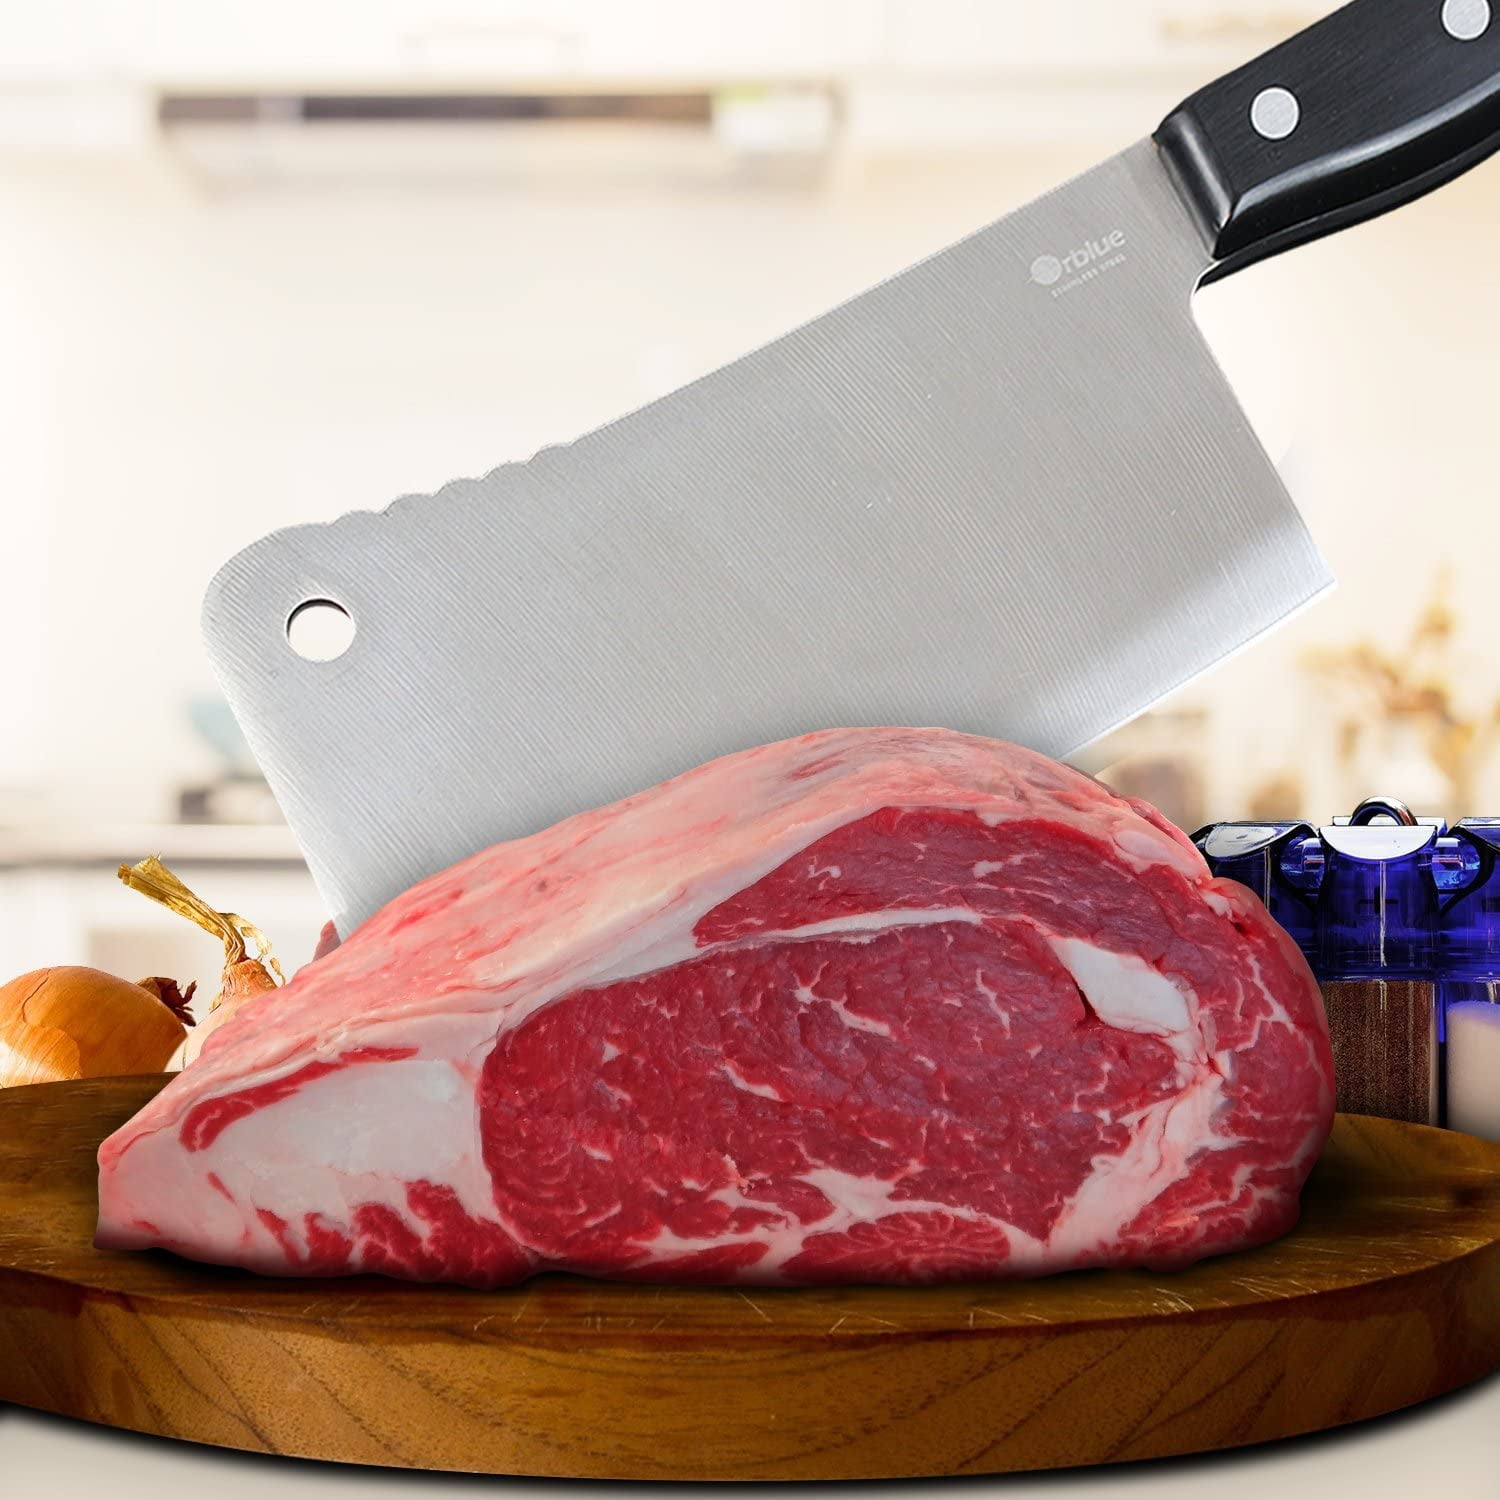 7 Inches Cleaver Knife Chopper Butcher Knife Stainless Steel Utopia Kitchen